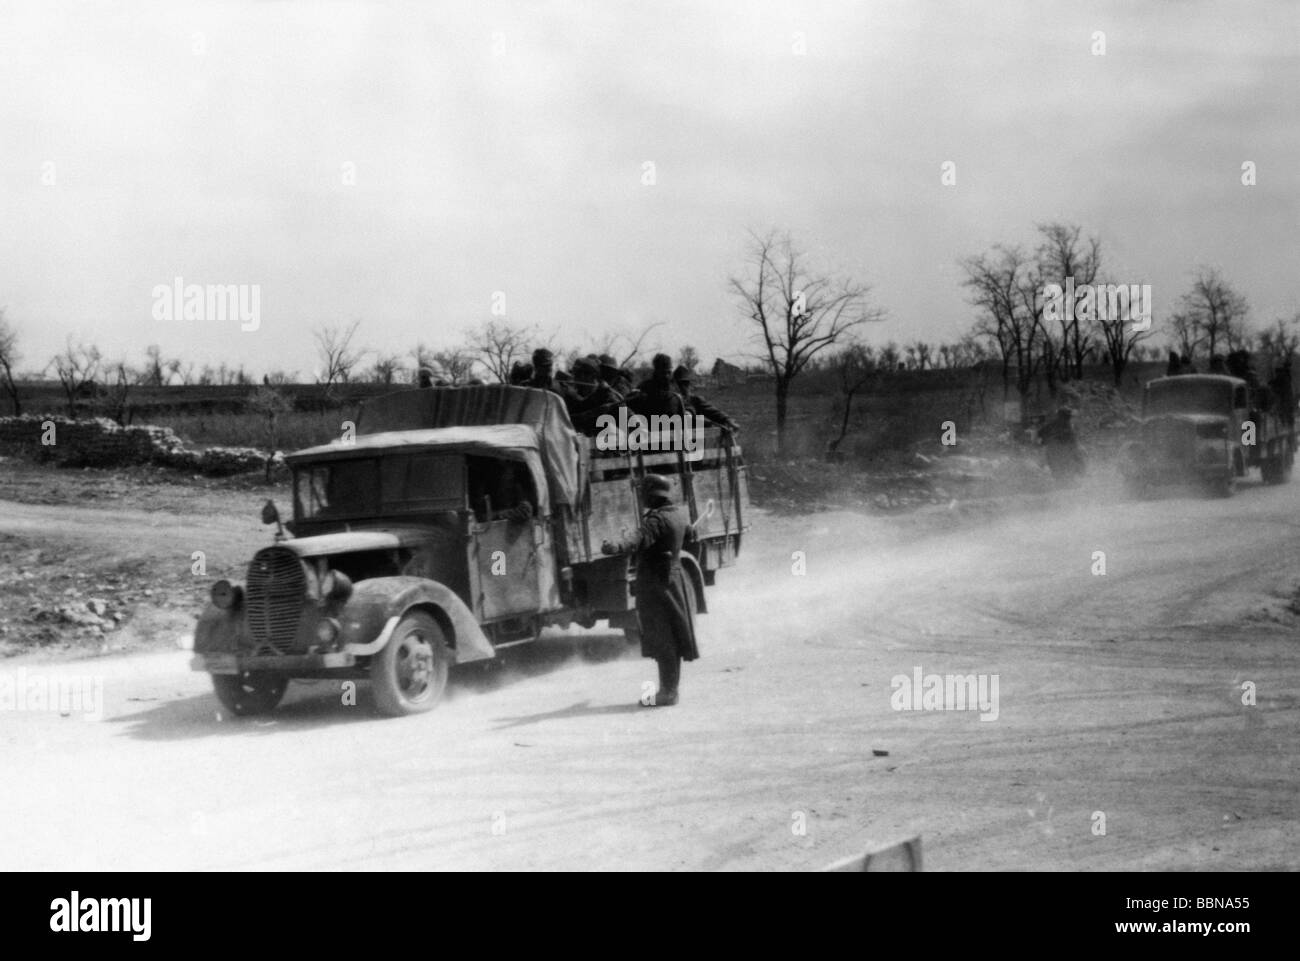 events, Second World War / WWII, Russia 1944 / 1945, Crimea, German soldier regulating the traffic on a crossroad near Sevastopol, April 1944, vehicle, vehicles, 20th century, historic, historical, Eastern Front, USSR, Soviet Union, road, lorry, Wehrmacht, Third Reich, military, 1940s, people, Stock Photo